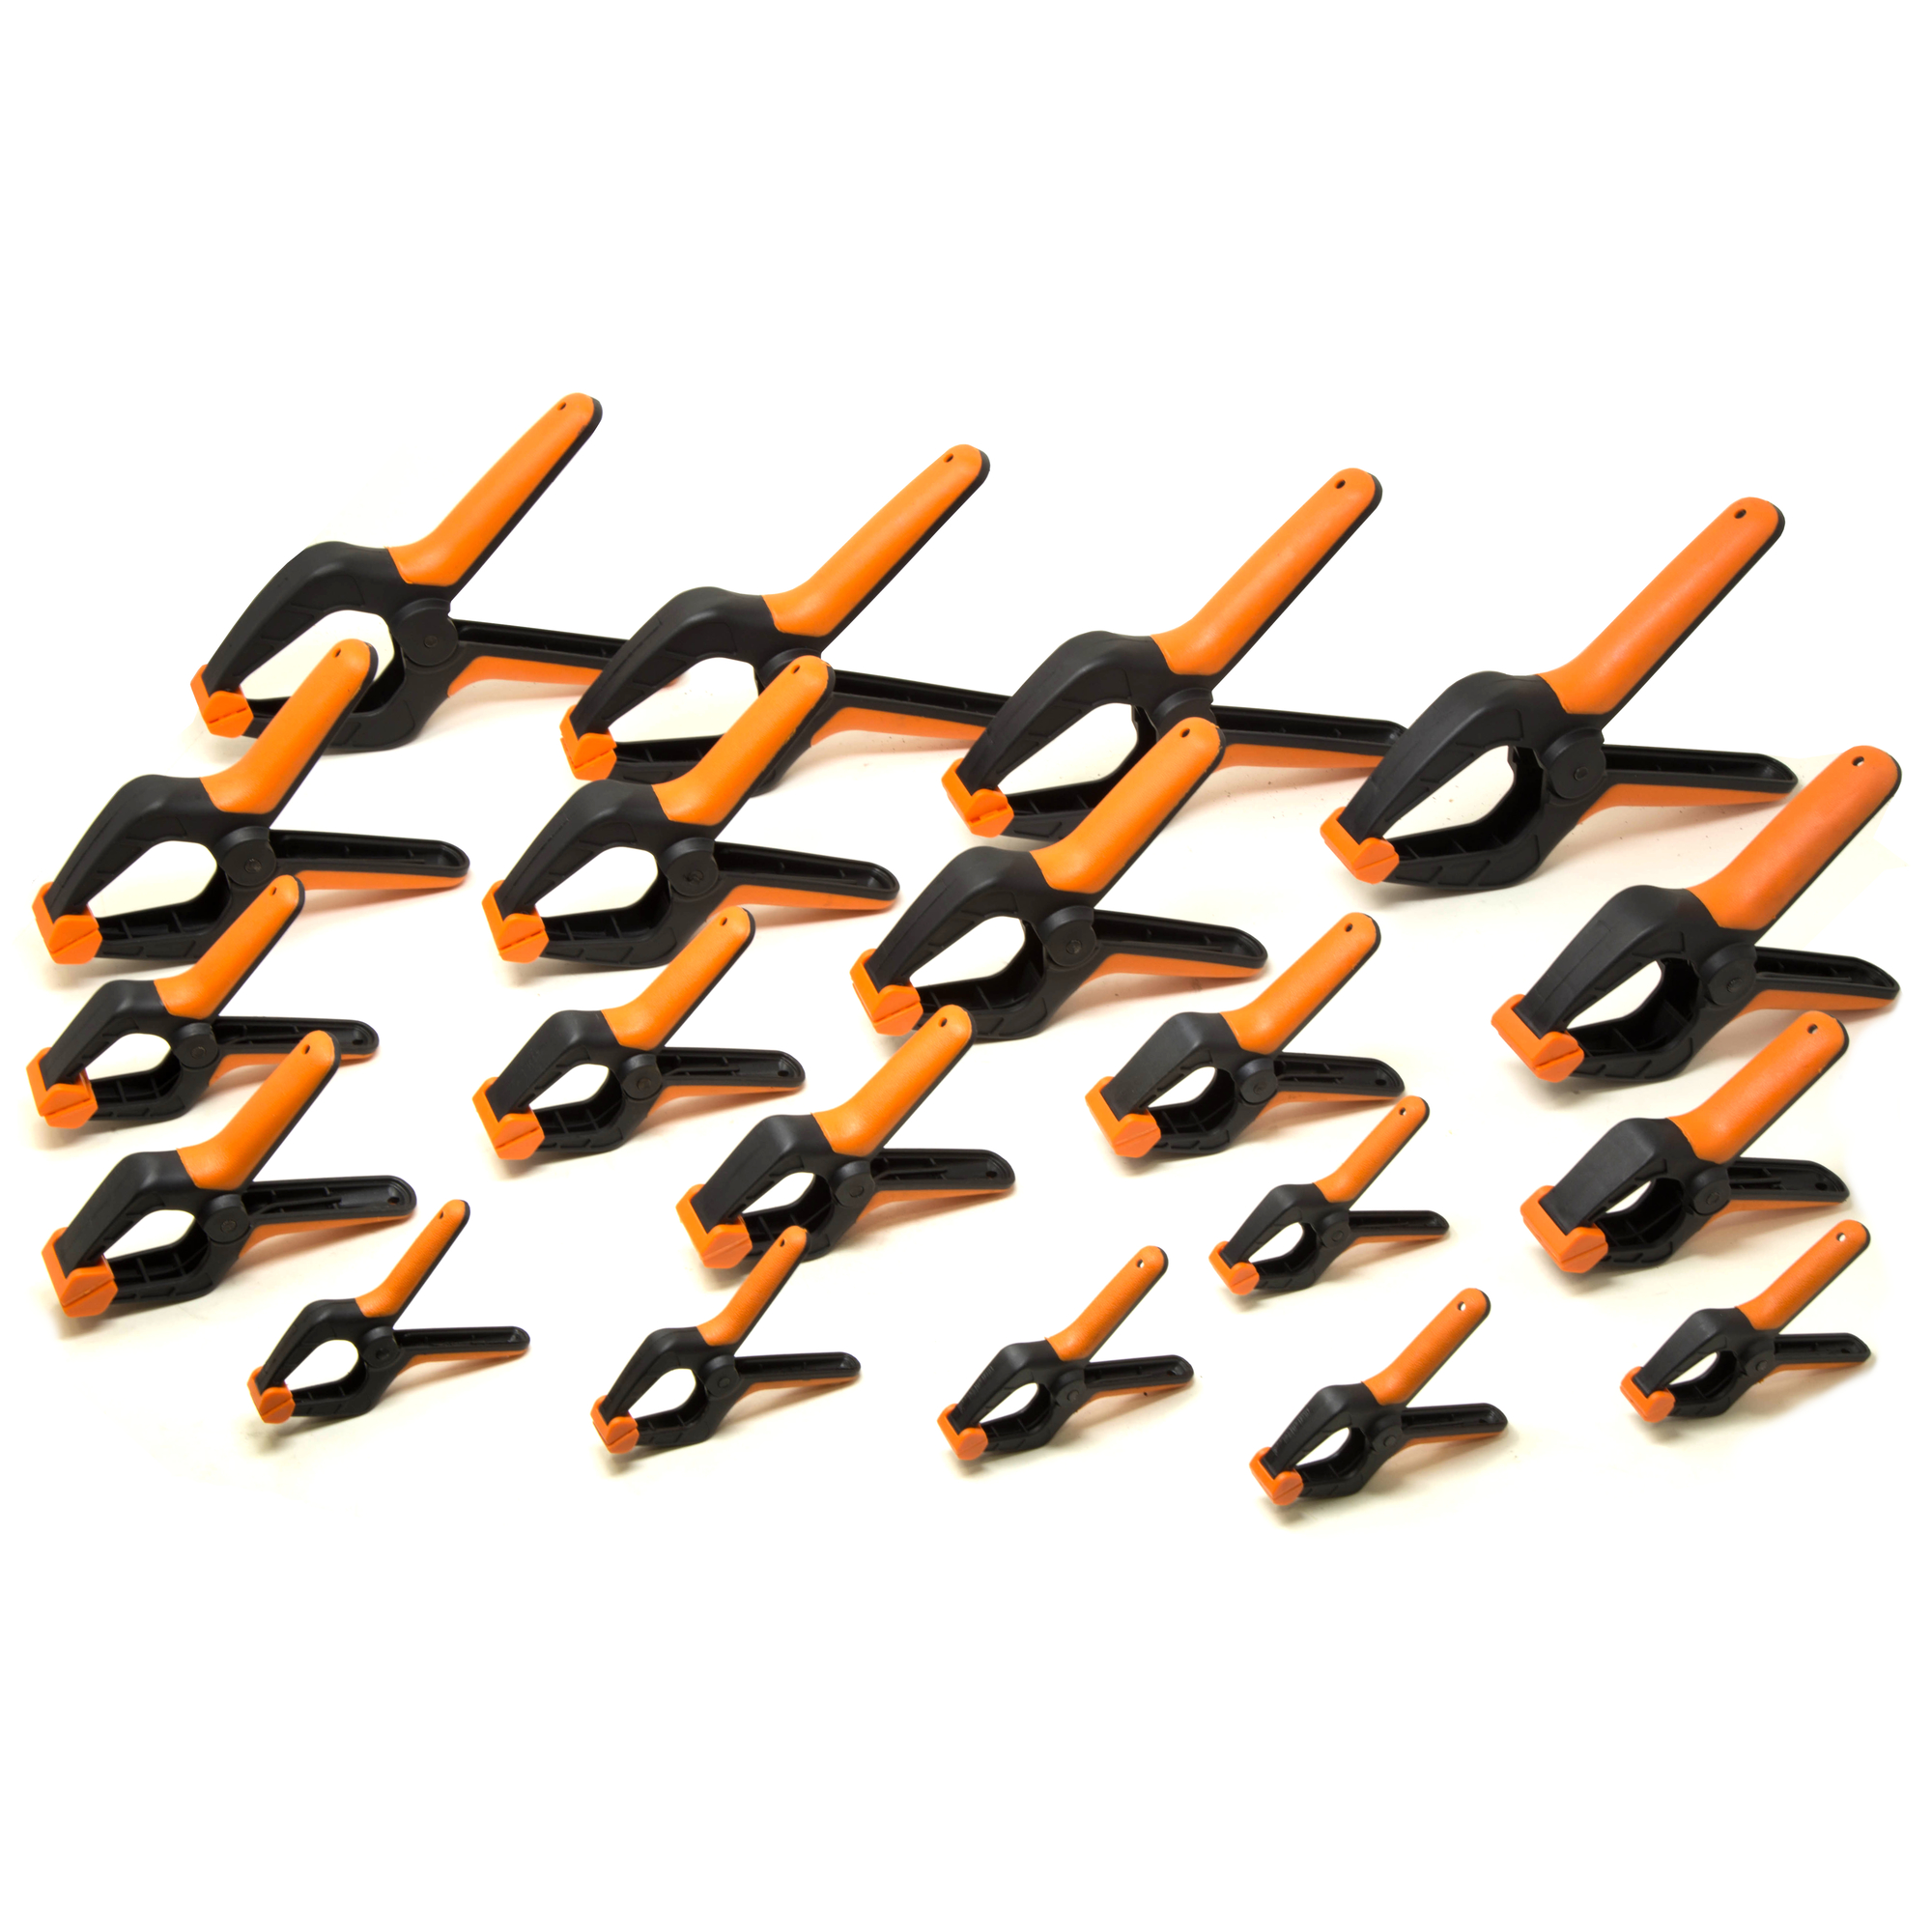 WEN, Spring Clamp Set with 0.75Inch, 1Inch, 2Inch and 3Inch Clamps, Pieces (qty.) 20 Model CLA200